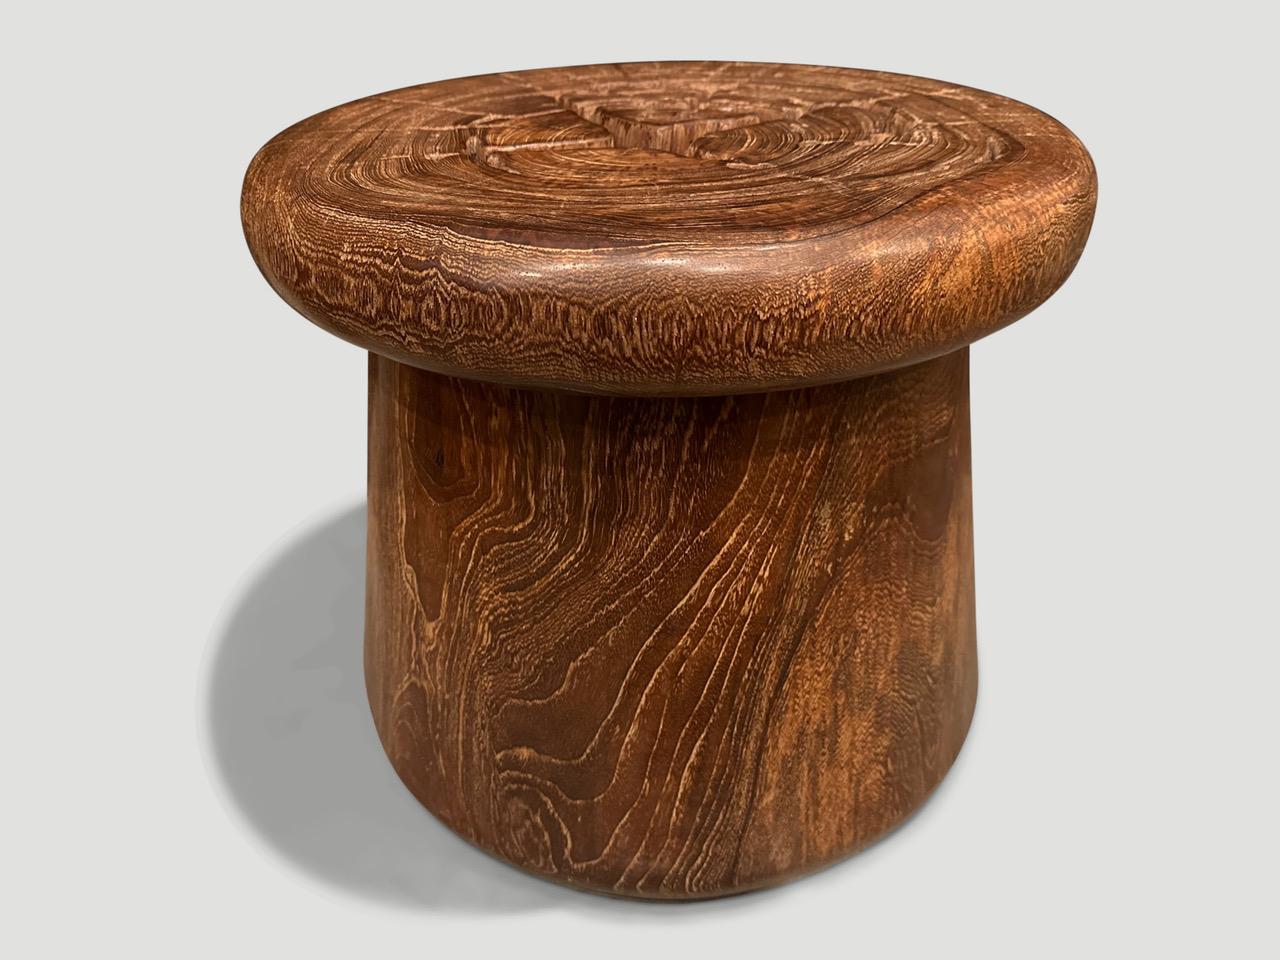 Antique mortar originally used to grind rice. We turned it upside down and smoothed out the entire piece revealing the beautiful wood grain.  Repurposed into a sculptural side table or stool. We have a small collection. The images and price reflect